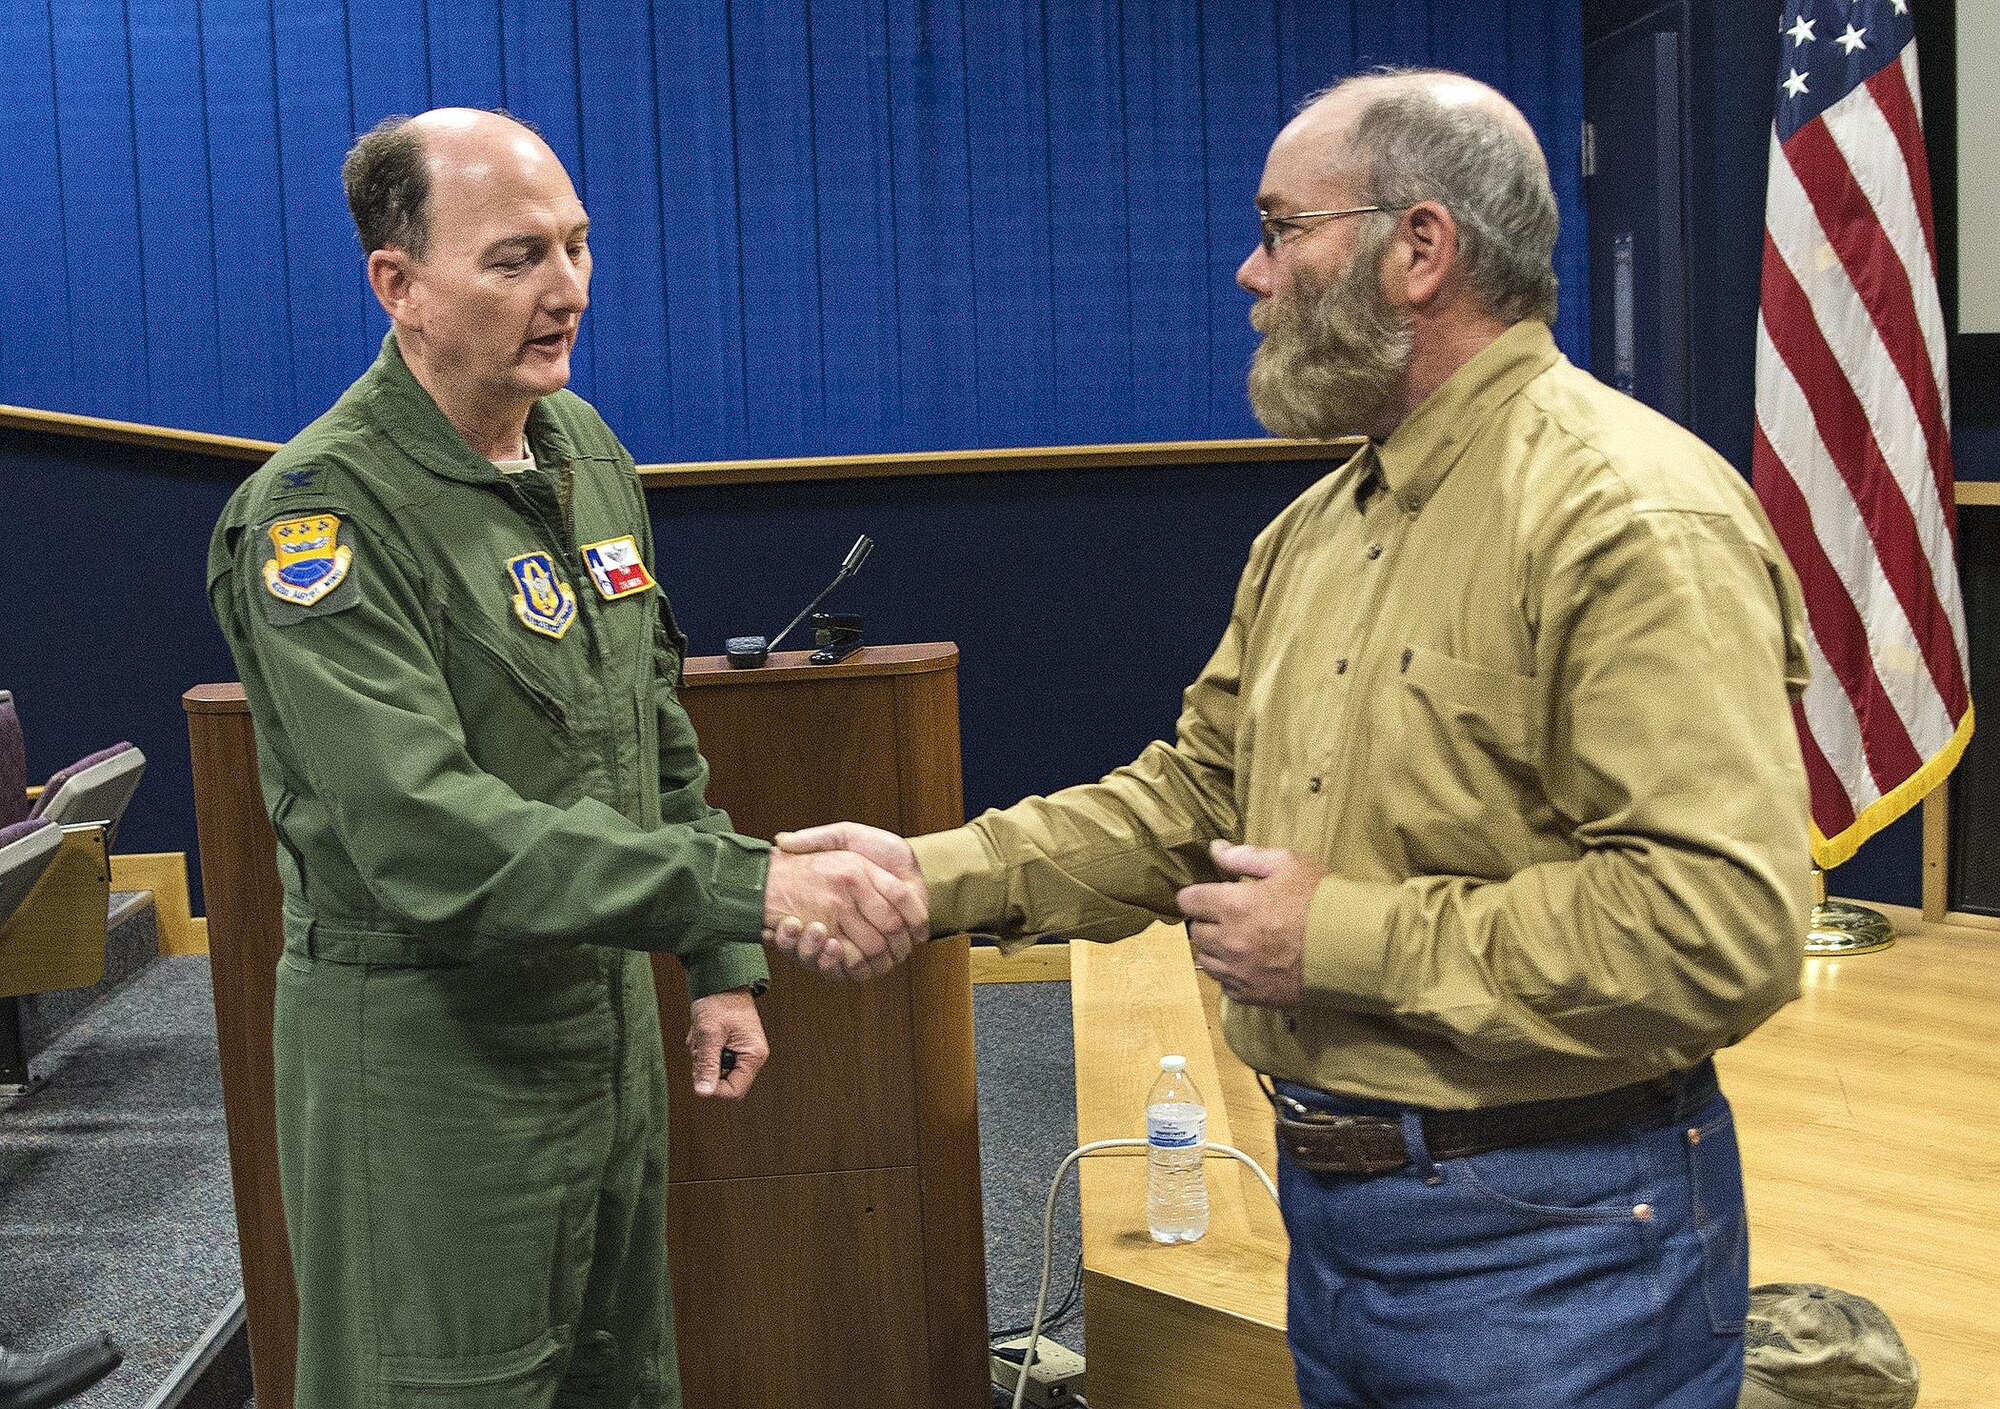 Col. Thomas K. Smith, Jr., 433rd Airlift Wing commander, coins Thomas Hamill on April 13, 2017 at Joint Base San Antonio-Lackland. Hamill was a government-contracted truck driver during the Iraq War in 2004, when his convoy was ambushed and he was taken prisoner. The speech focused on being resilient and never giving up in the face of danger.  (U.S.  Air Force photo by Benjamin Faske)